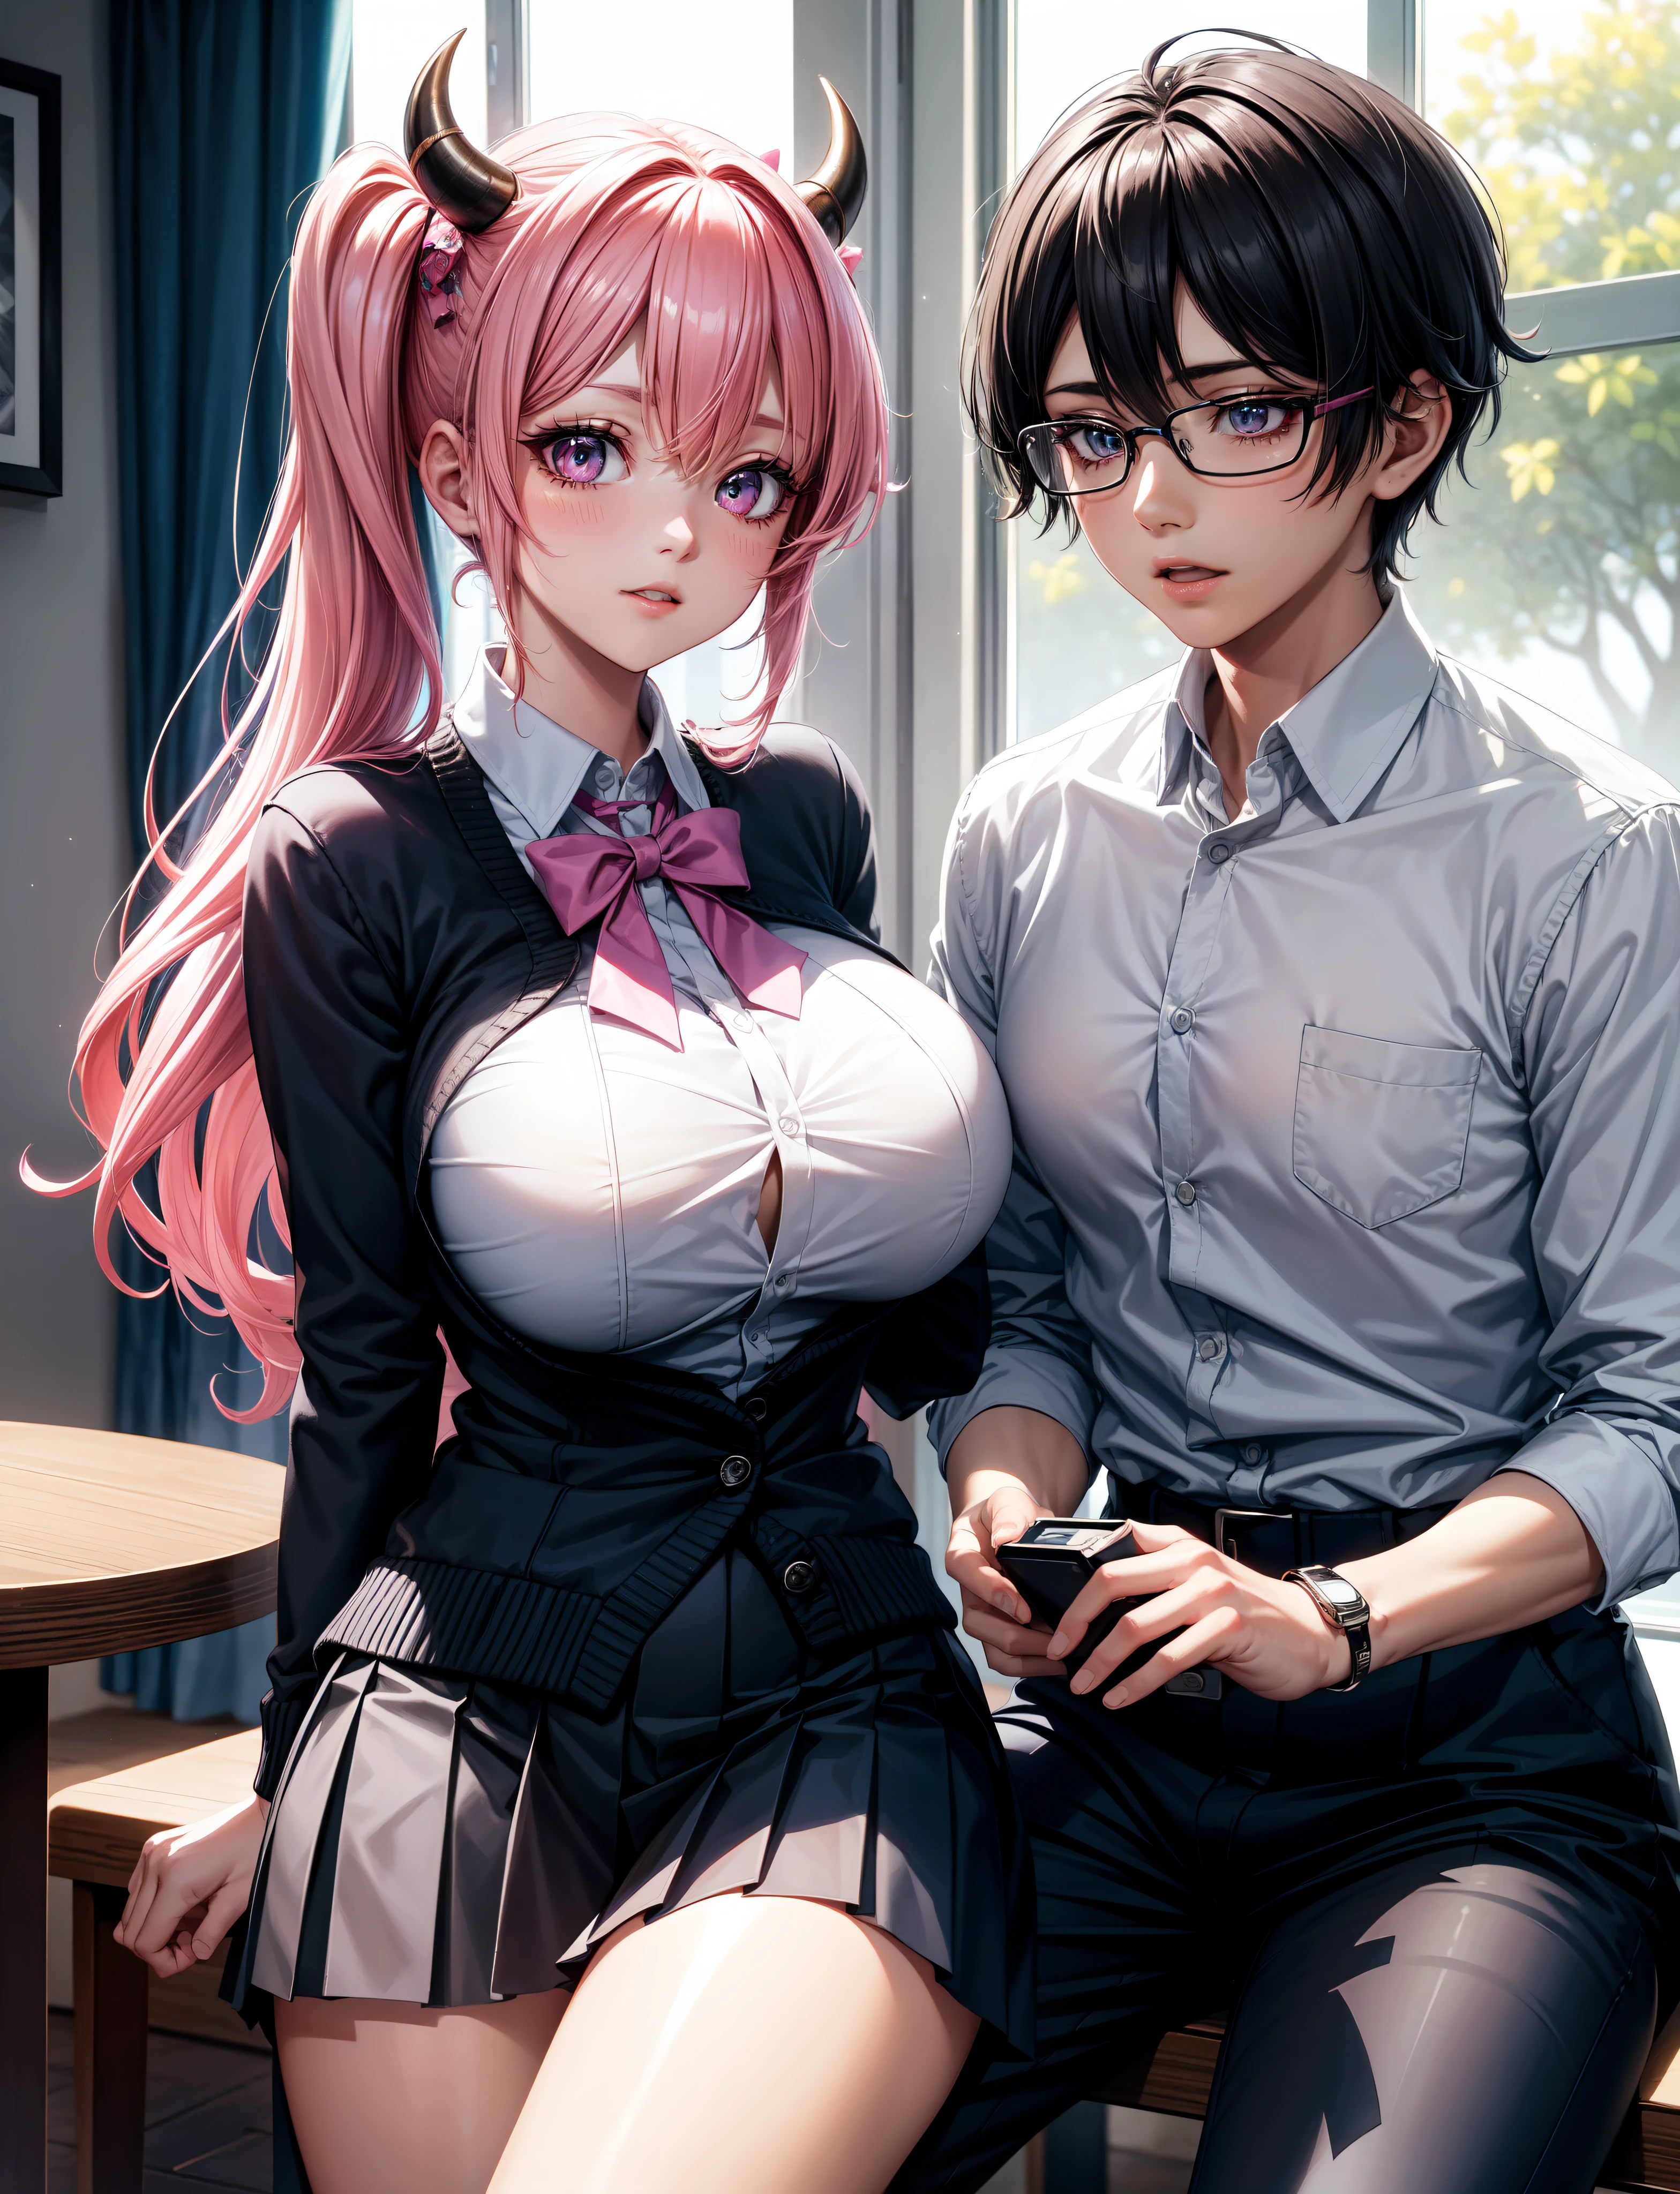 4k,  ,Lens flare, pink hair ,mascara, eyeliner, god rays, 4k, 8k, best quality, masterpiece, hyper detailed, intricate detail, 1boy, 1 girl,  detailed, Detailed fuchsia hair ++, detailed pink eyes ++,  raytracing, perfect shadow, highres, enhanced eyes,  huge breasts, horns, seductive,  hyper detailed, Dressed in a pleated skirt, a button-up blouse, and knee-high socks, your anime girl exudes a scholarly yet fashionable aura. A cardigan and loafers add a touch of sophistication. Your anime girl adds large ribbon bows at the base of each twin tail. This style is both adorable and attention-grabbing, highlighting her playful nature. She is tutoring another school boy, 1 boy, dressed in school attire, he is being tutored